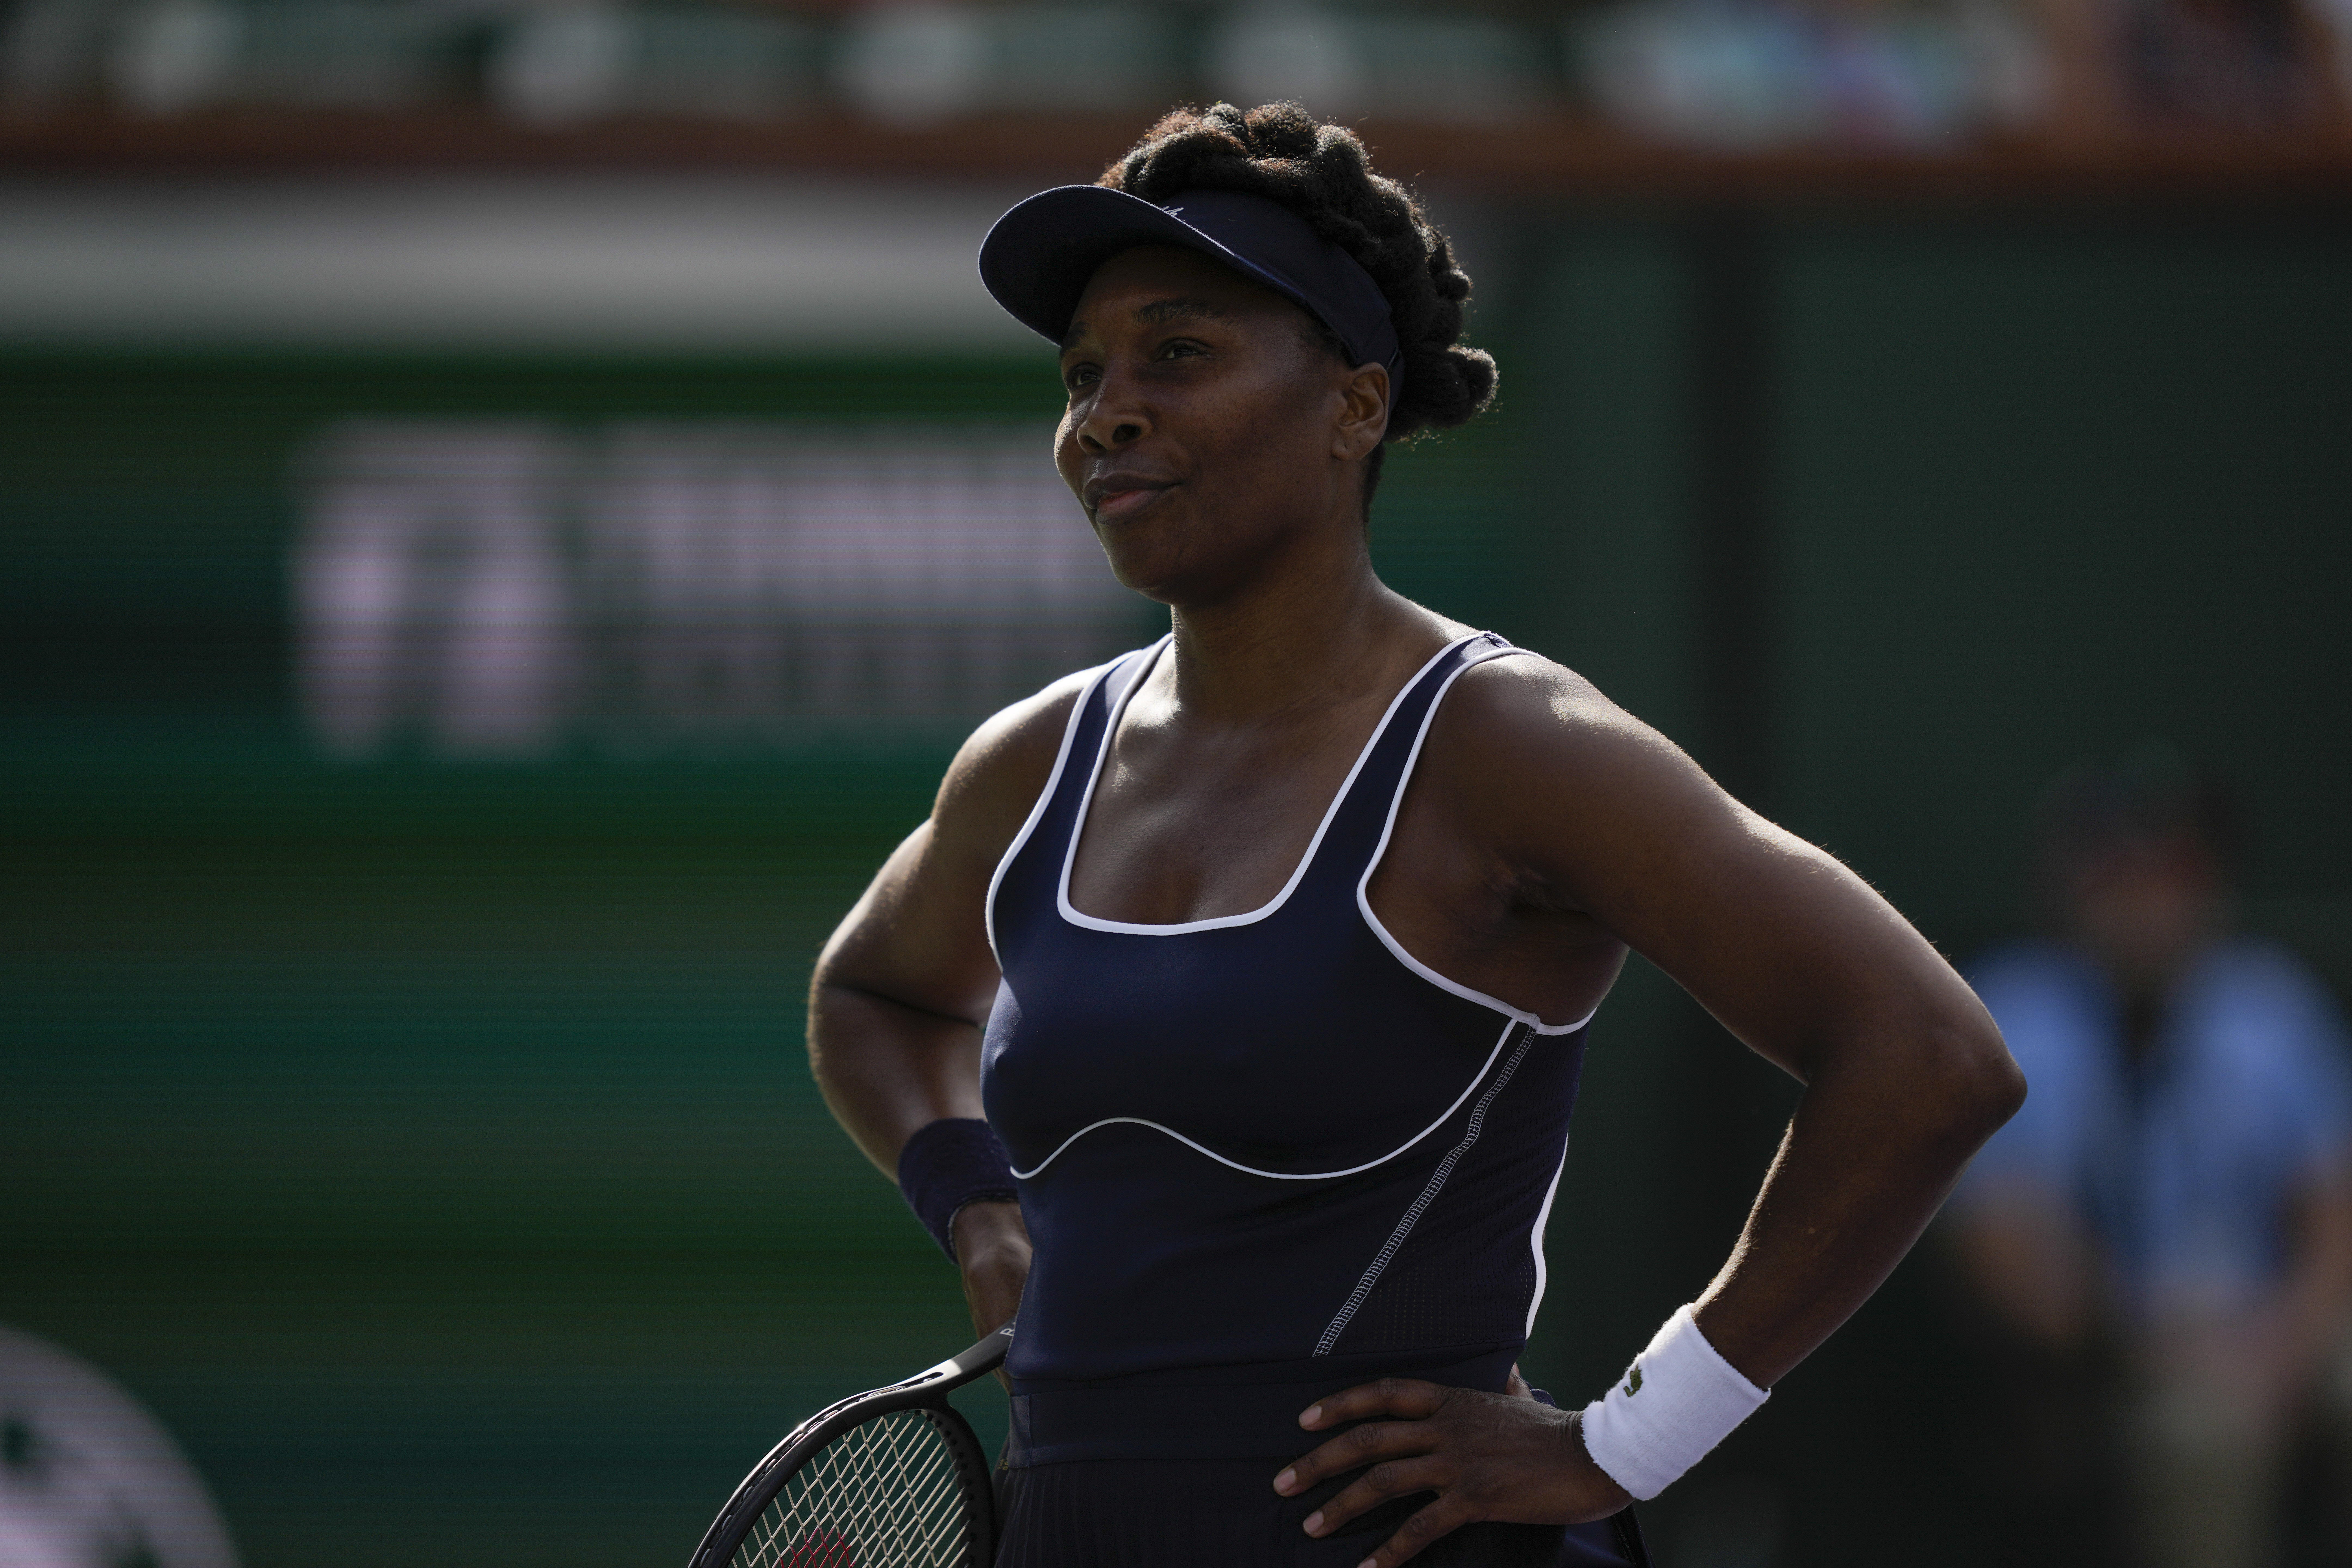 Venus Williams loses at Indian Wells in her first match since the US Open. Naomi Osaka advances